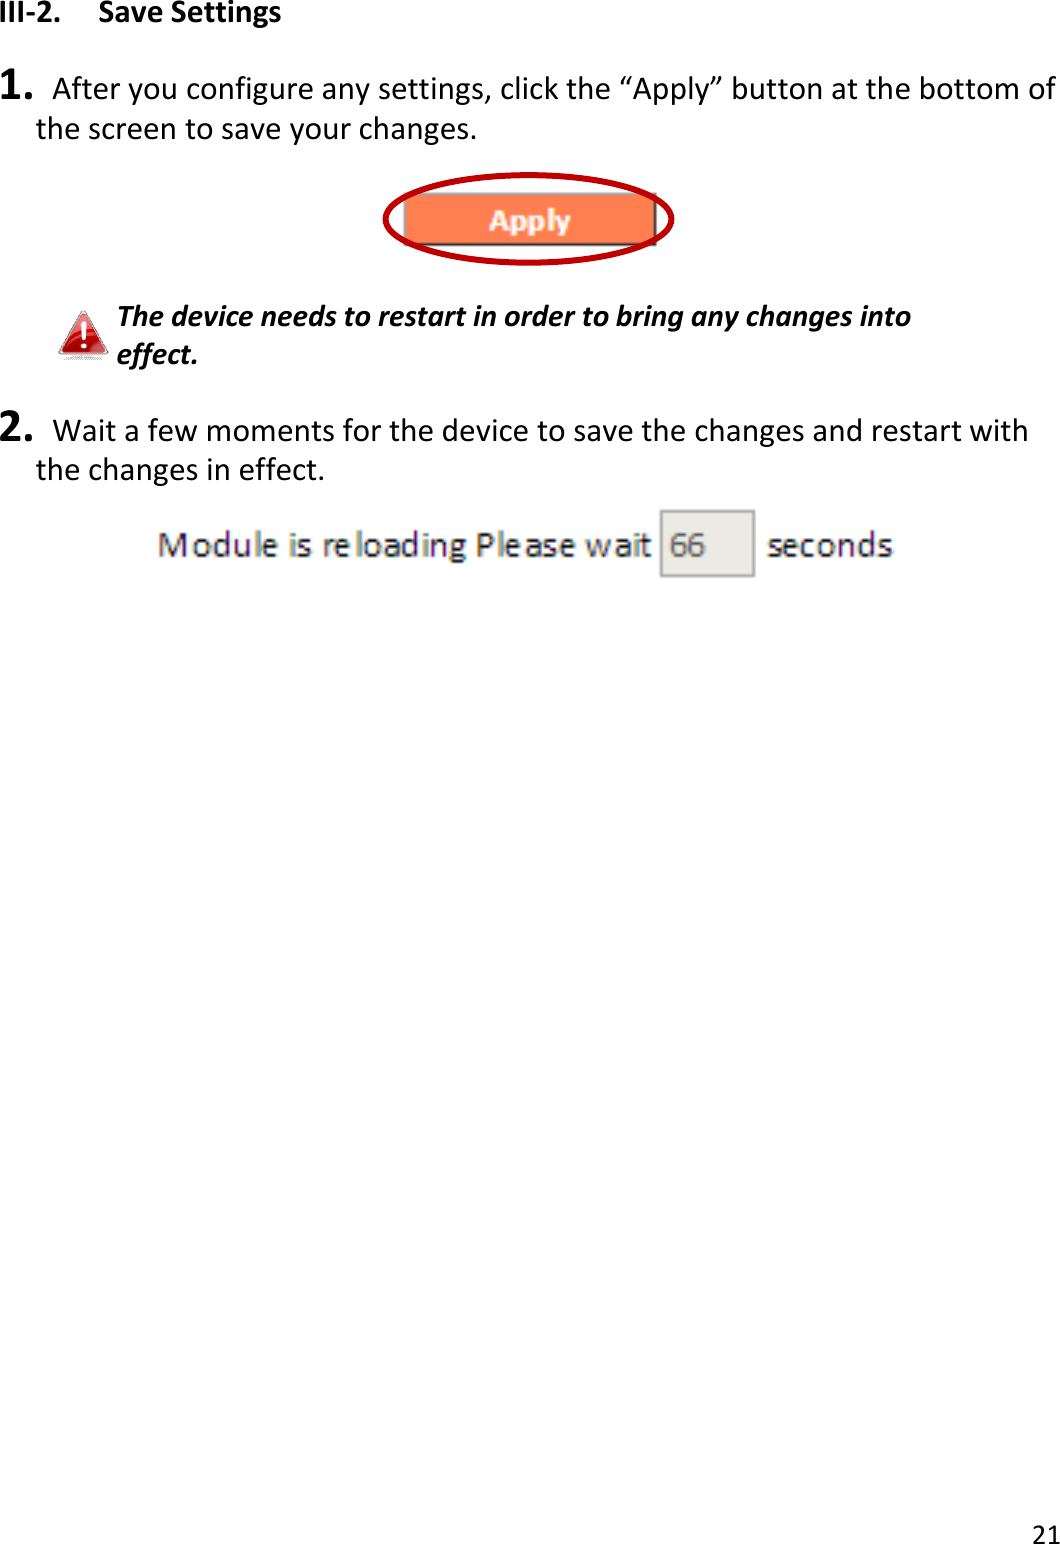 21  III-2.  Save Settings  1.  After you configure any settings, click the “Apply” button at the bottom of the screen to save your changes.  The device needs to restart in order to bring any changes into effect.  2.  Wait a few moments for the device to save the changes and restart with the changes in effect.   